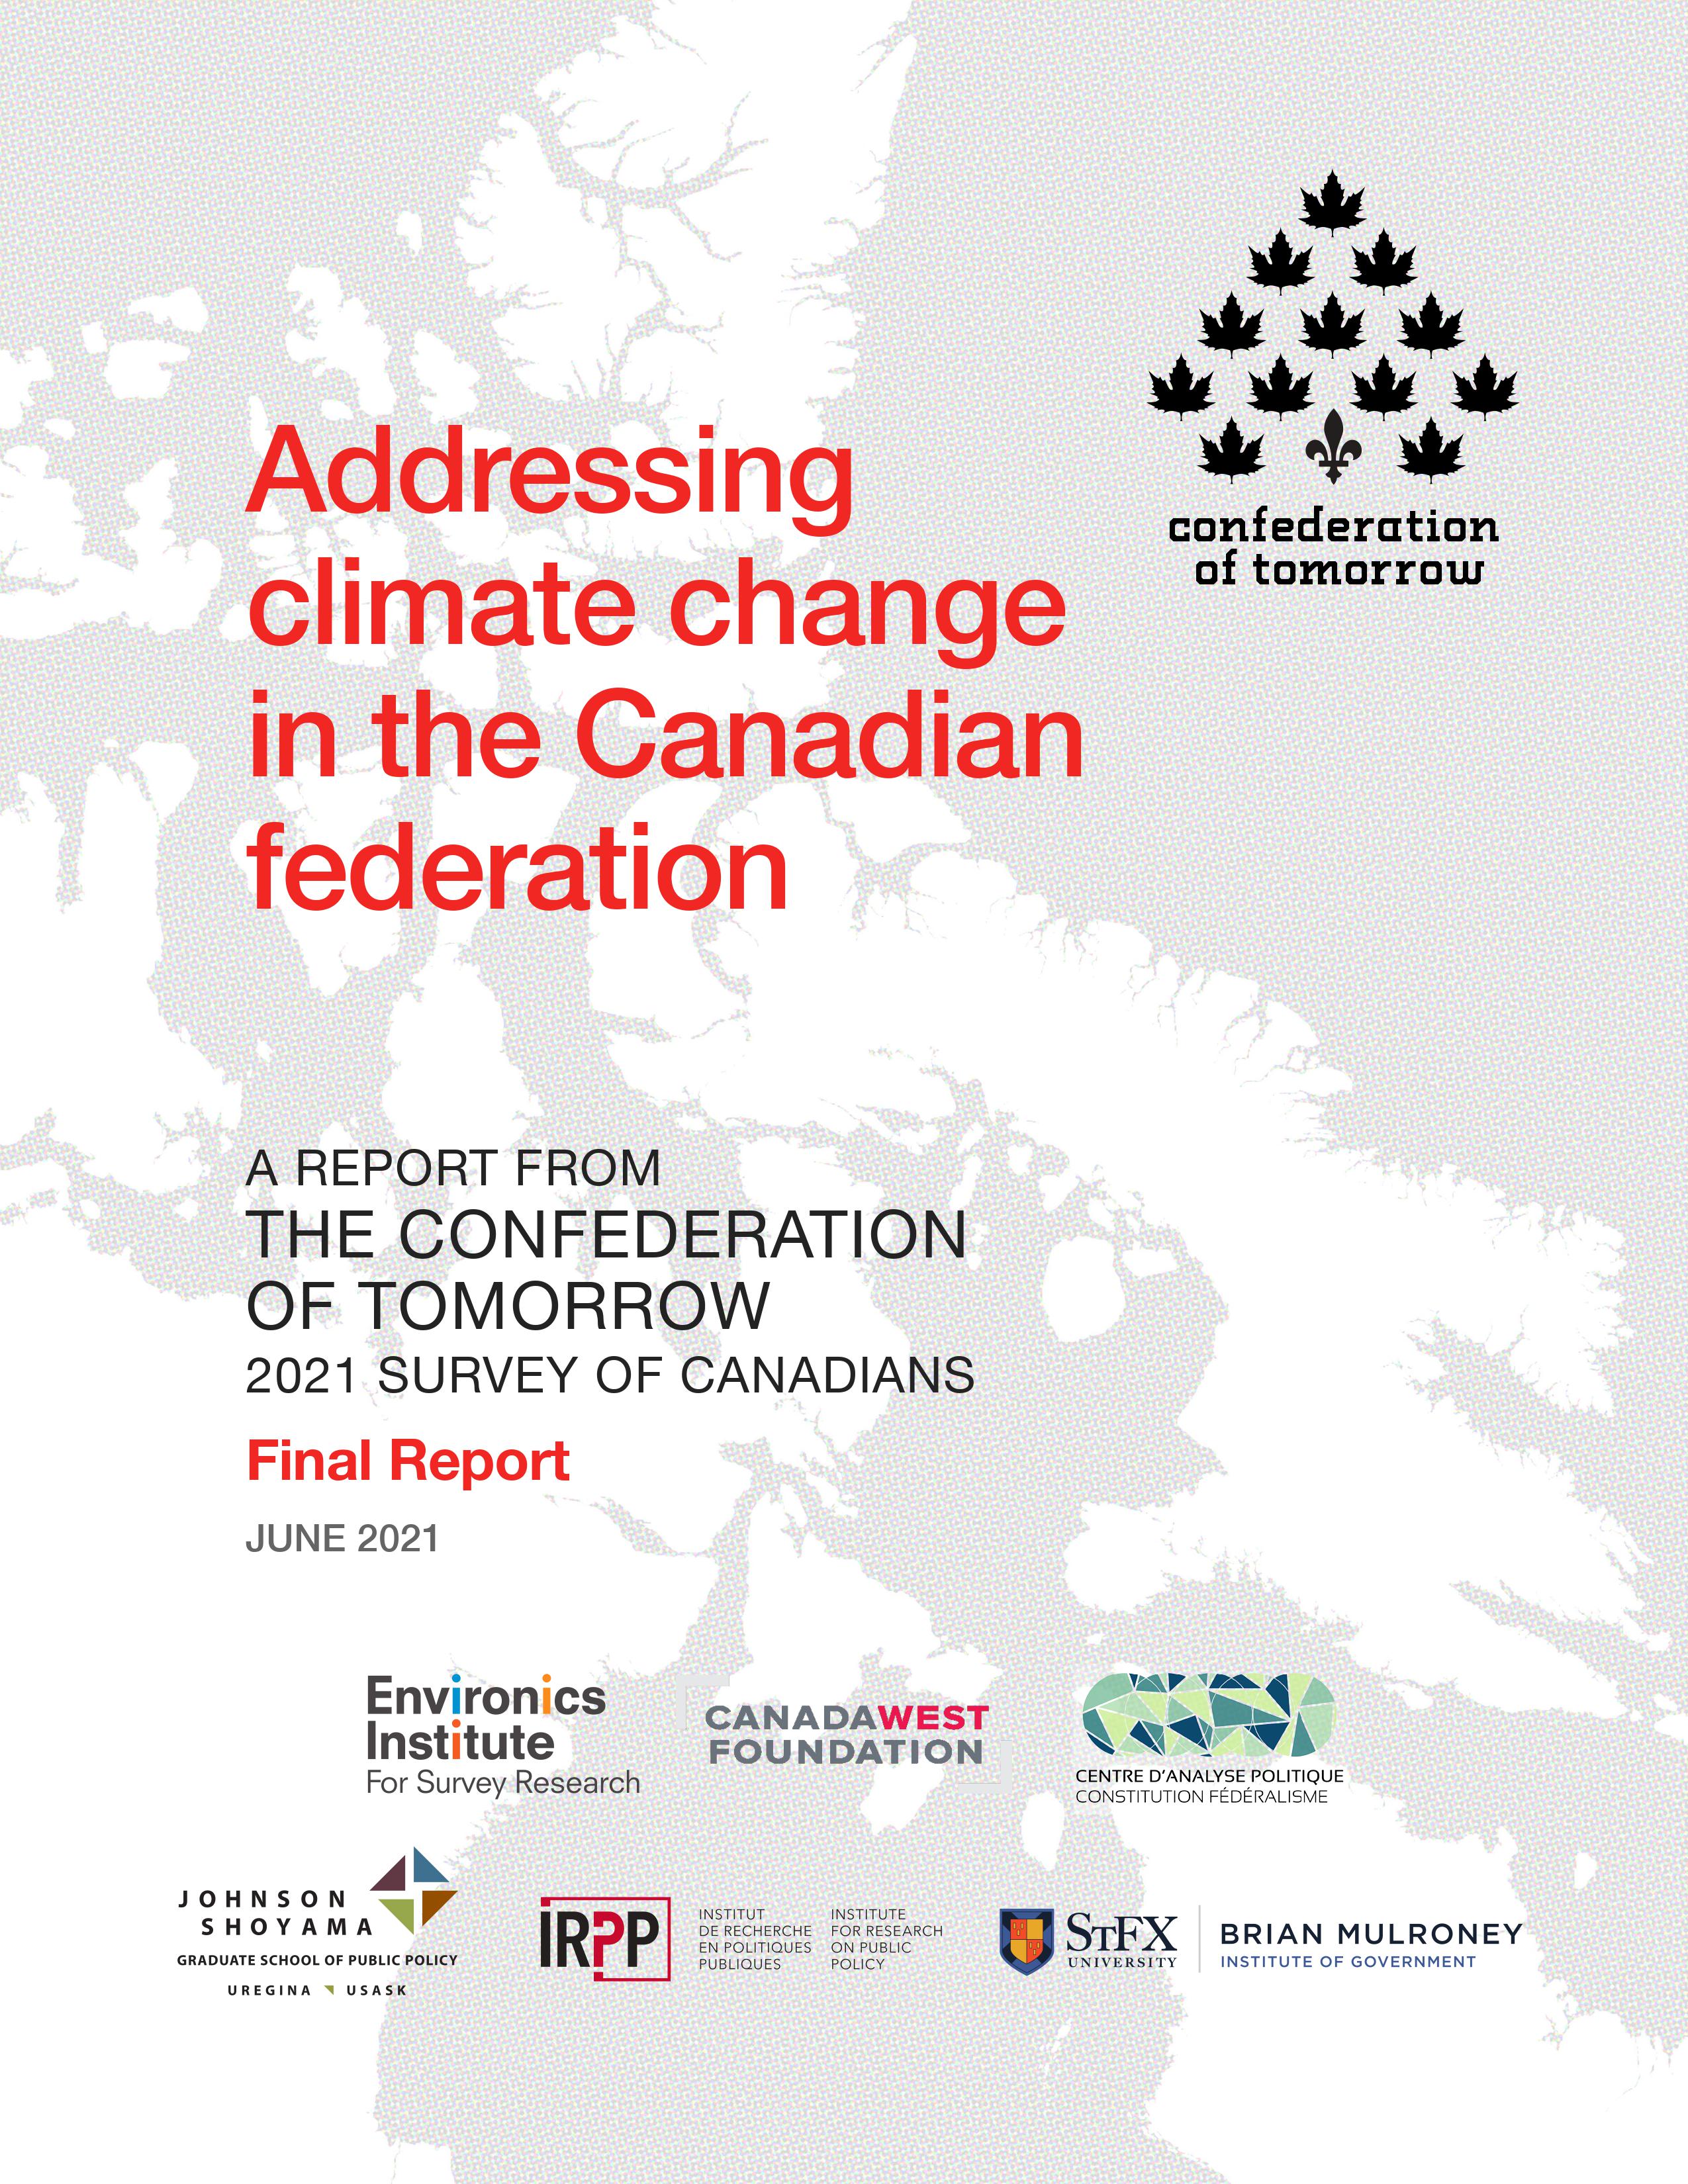 Addressing climate change in the Canadian federation